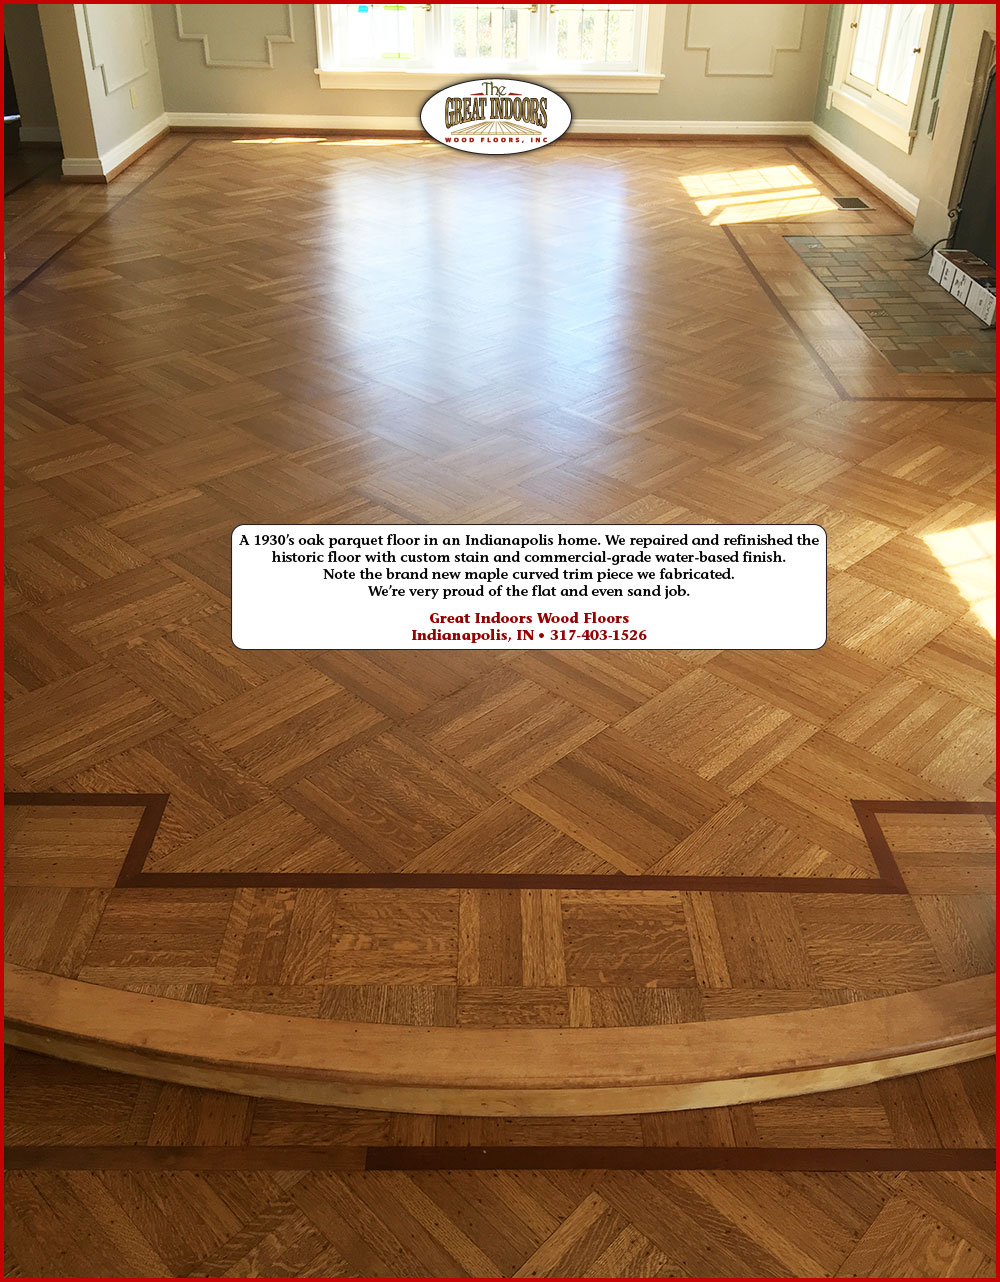 1930s oak parquet floor with custom stain color in an Indianapolis home